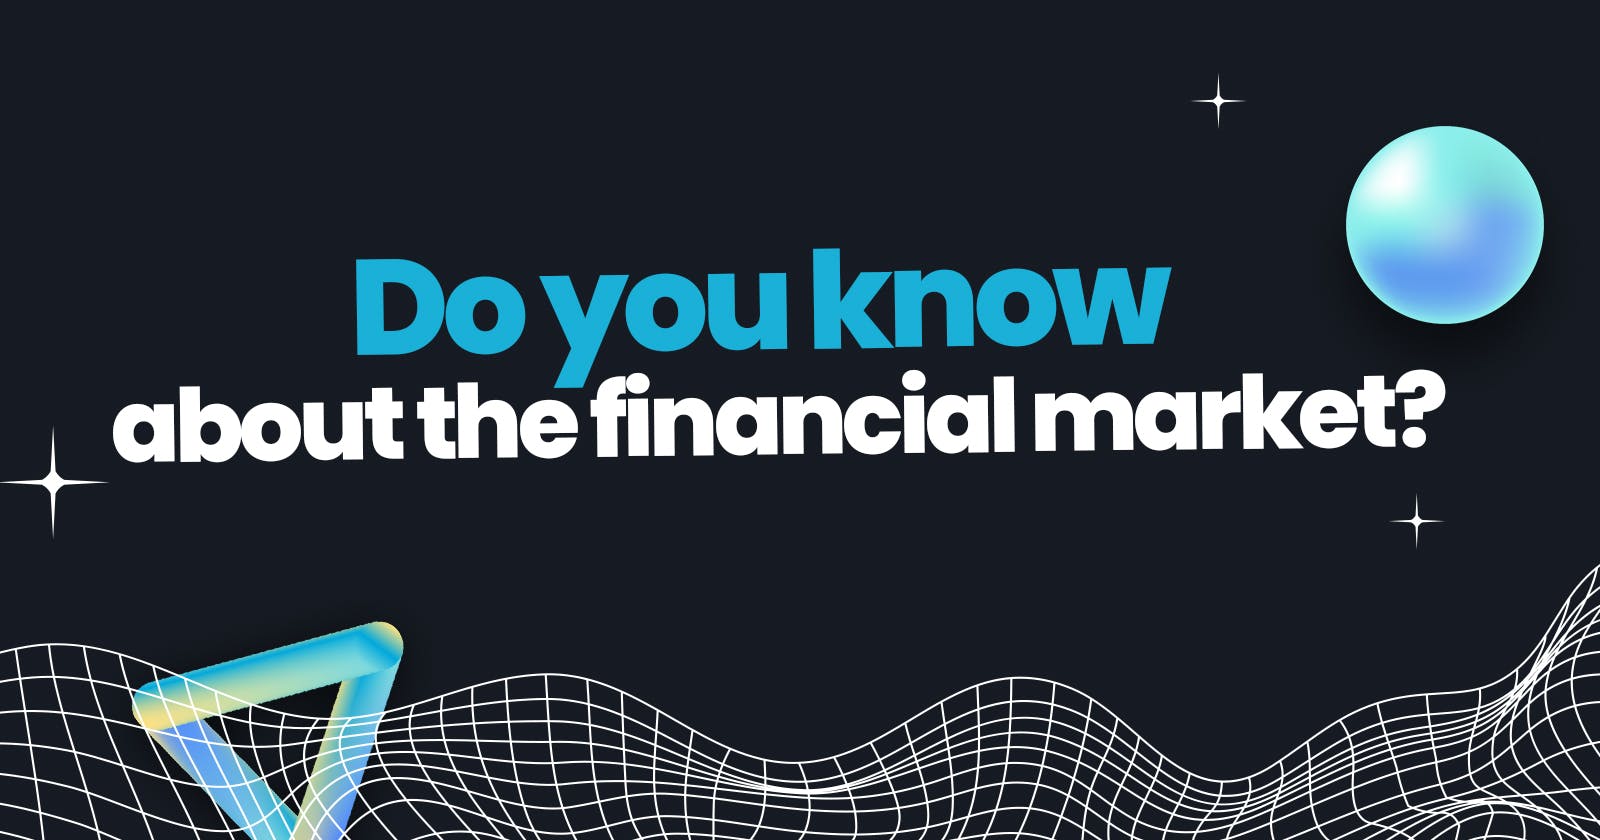 Do you know about the financial market?